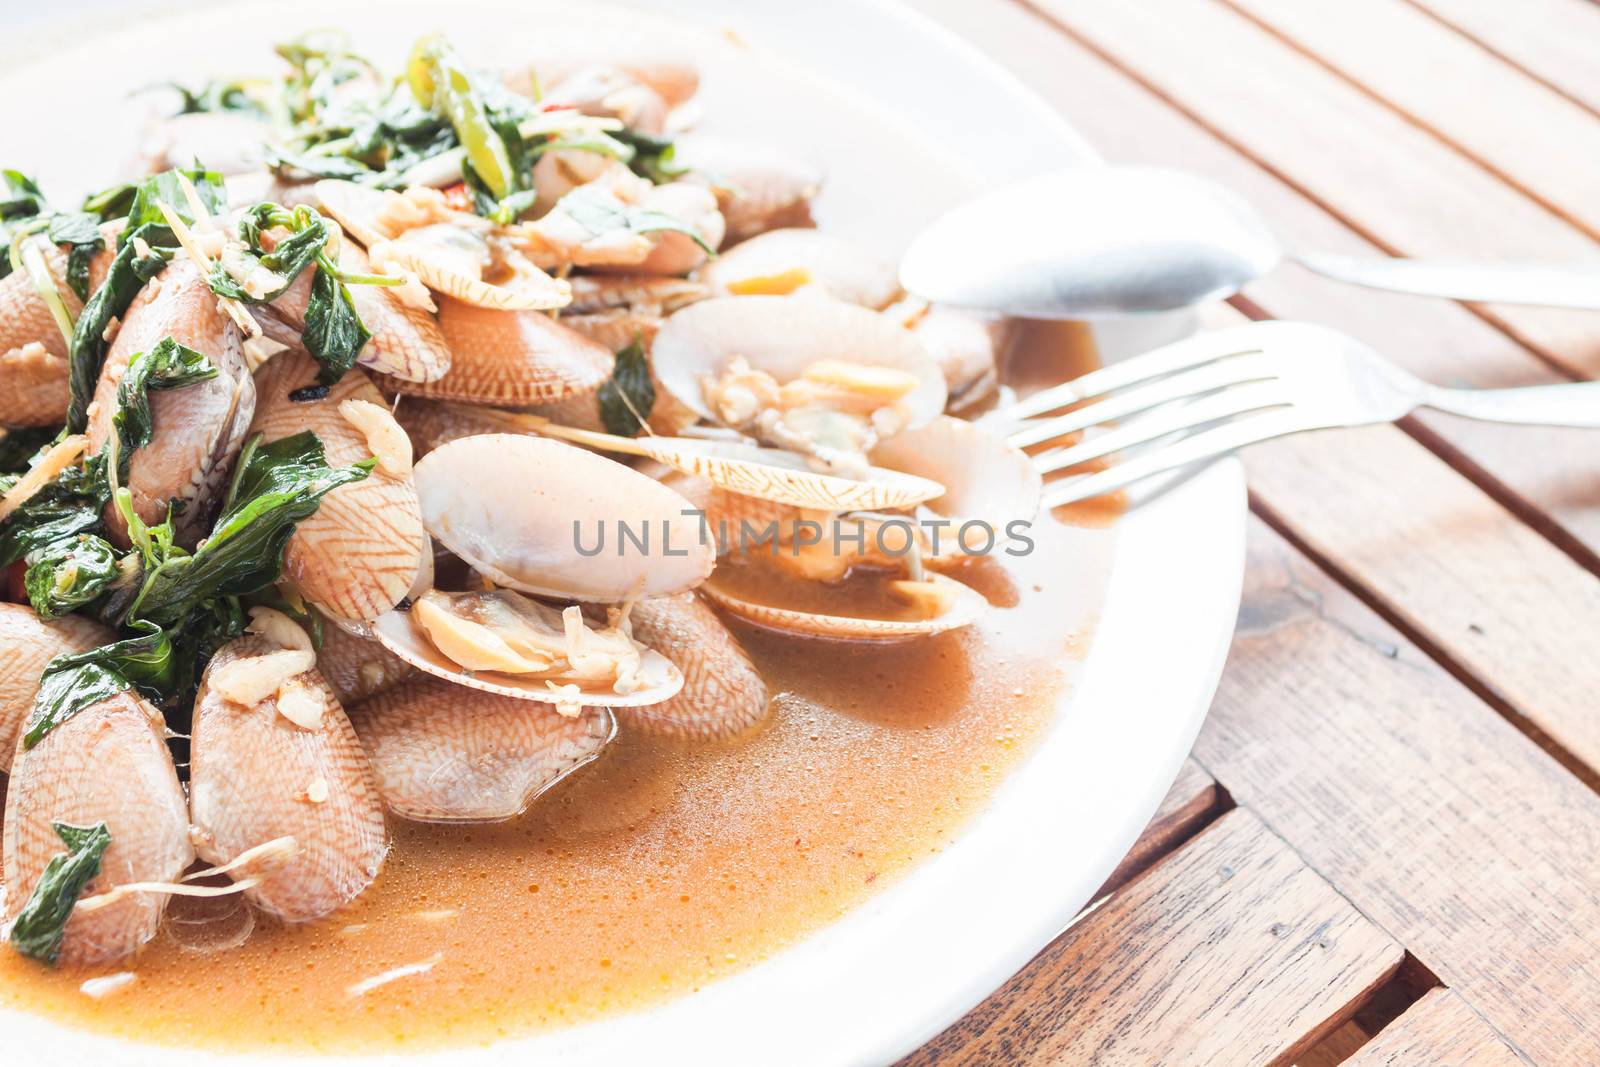 Stir fried clams with roasted chili paste on wooden table by punsayaporn